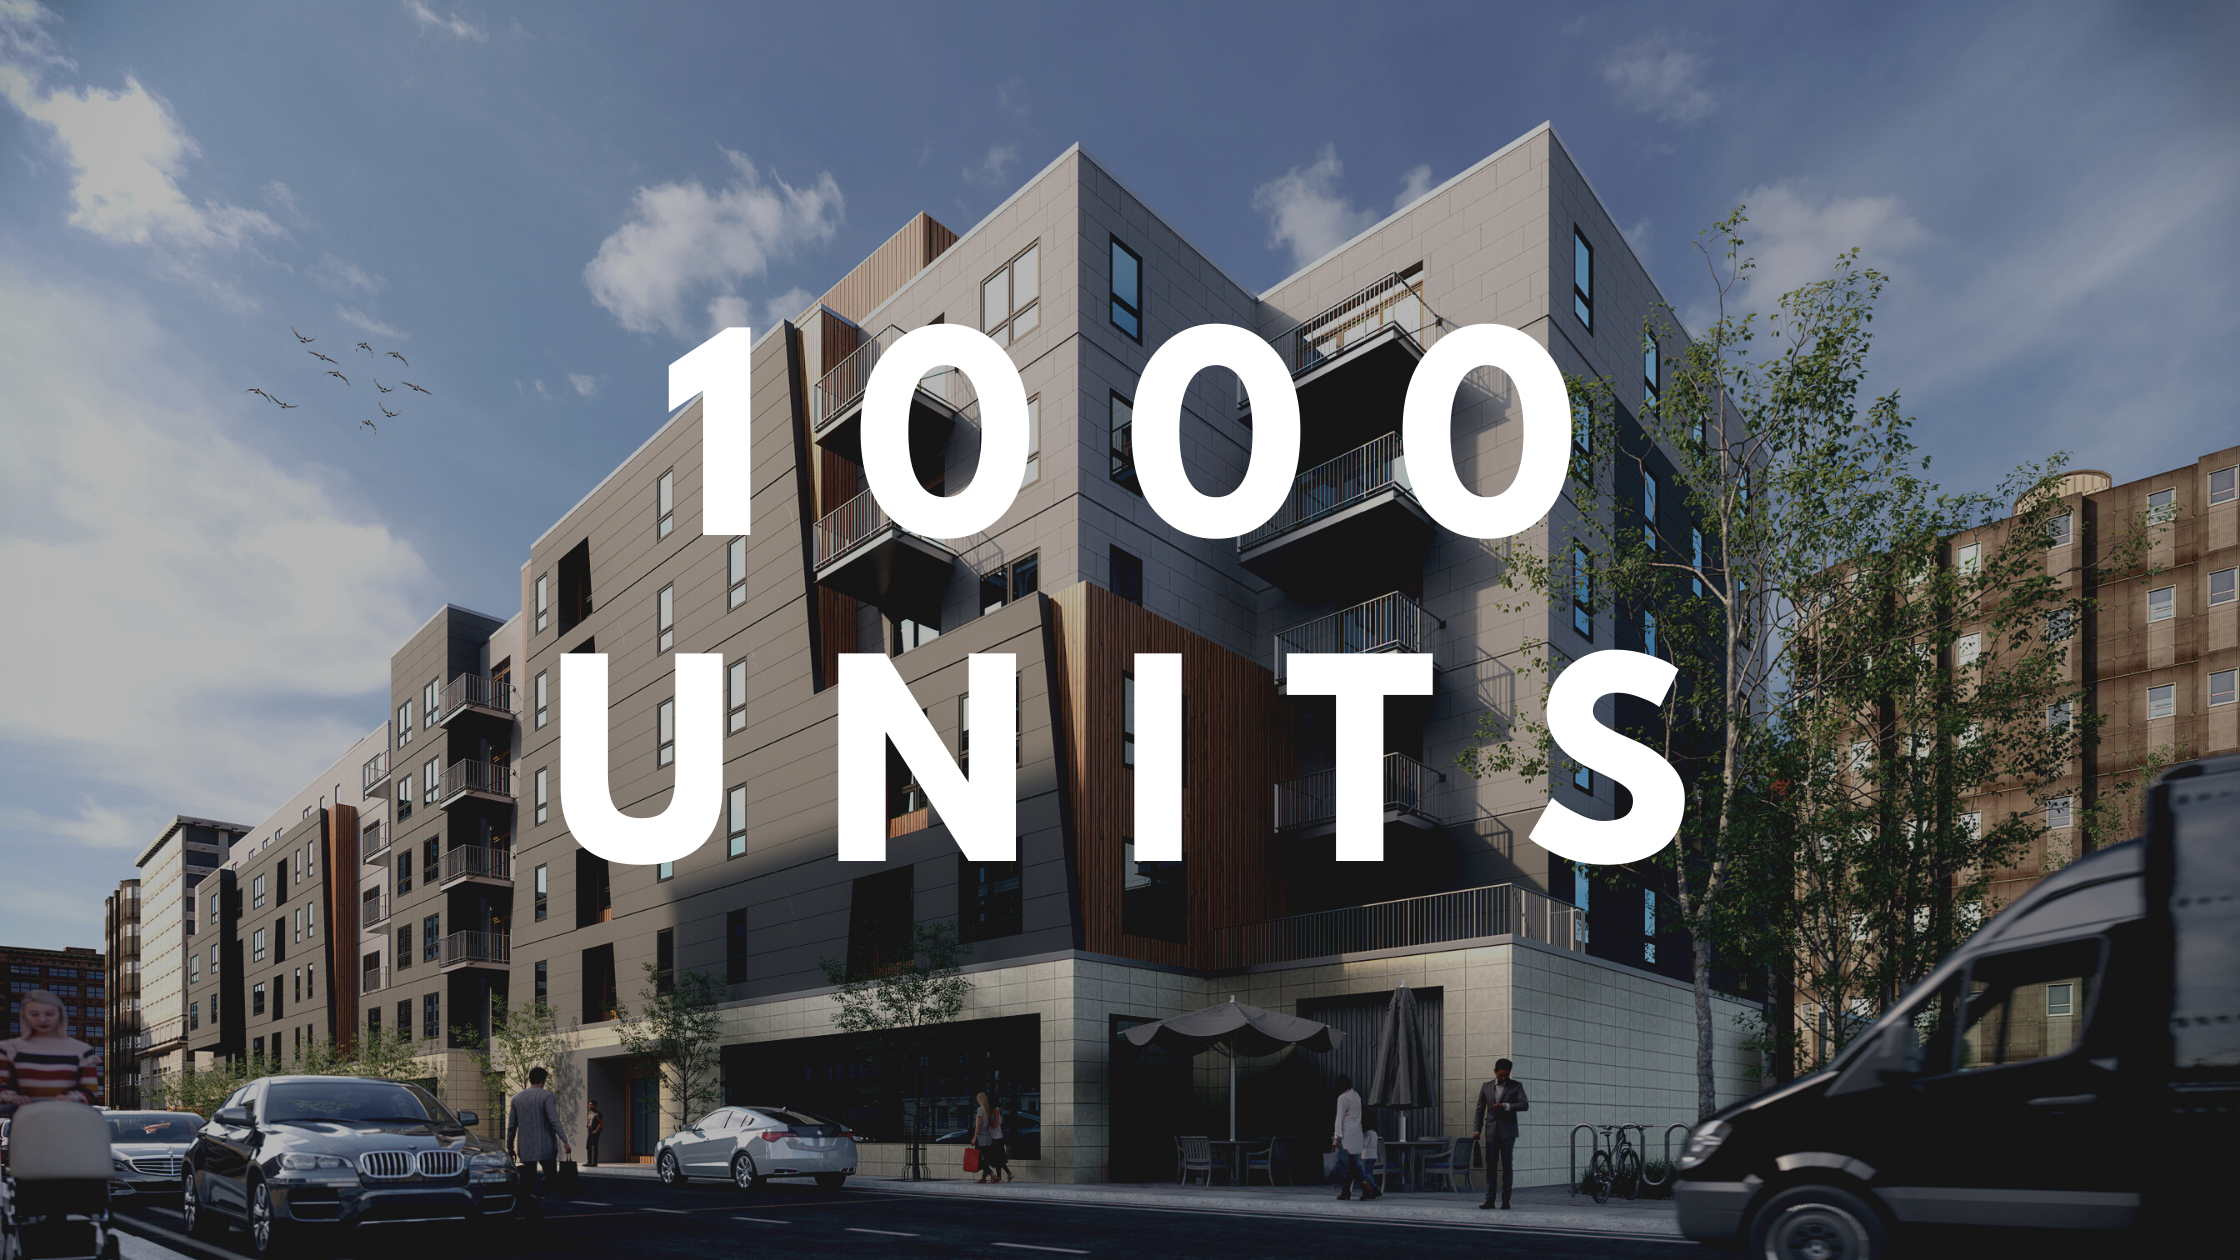 CHARLESGATE Announces New Development Pipeline Now Over 1,000 Units!